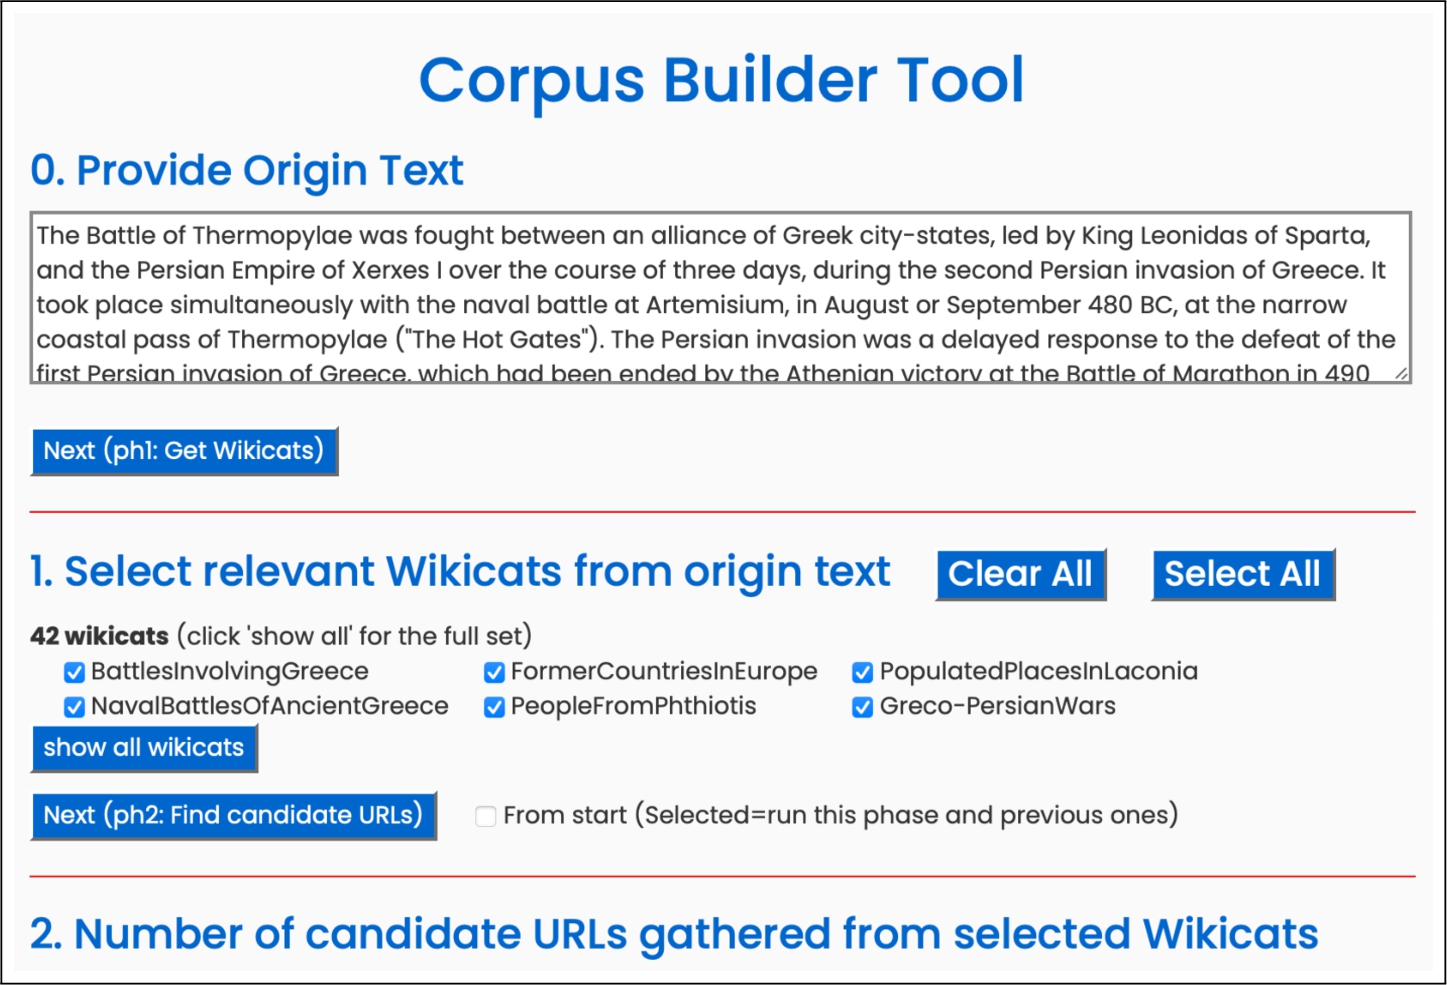 Snapshot of the corpus builder tool developed to explore and identify wikicats that are relevant in the context of the initial text T0 (available at https://github.com/gssi-uvigo/Plethora).